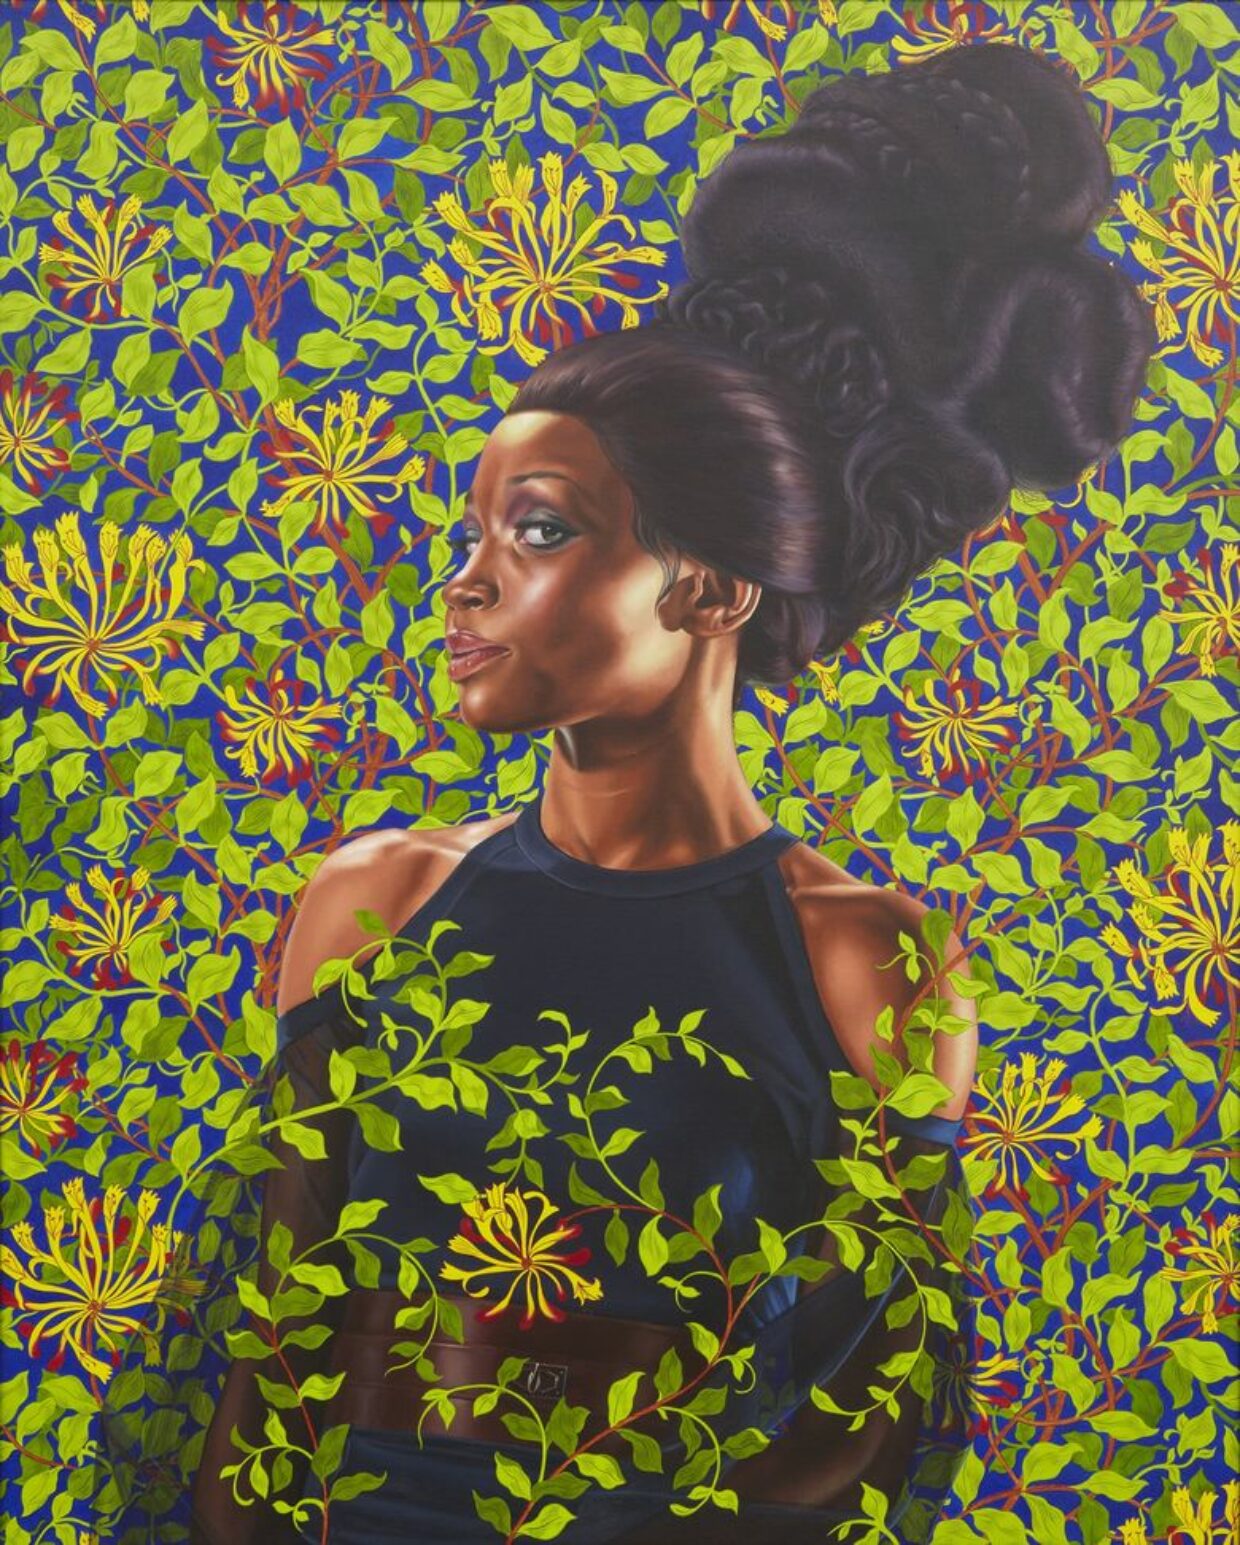 “Kehinde Wiley – A New Republic” exhibition opens Saturday at VMFA | 5